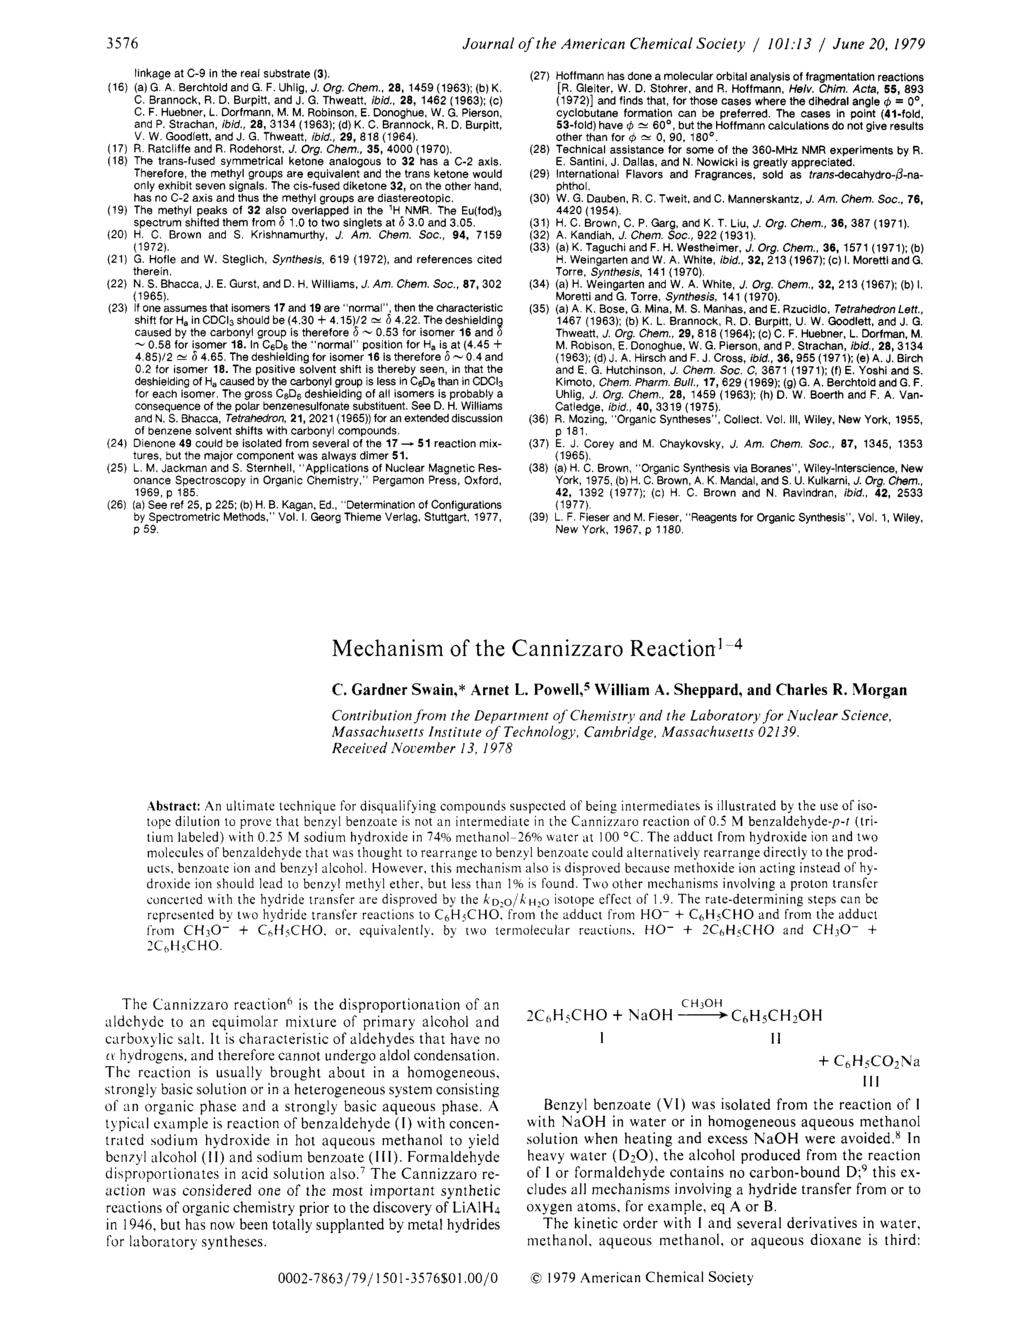 3516 Journal linkage at C-9 in the real substrate (3). (16) (a) G. A. Berchtold and G. F. Uhlig, J. Org. Chem., 28, 1459 (1963); (b) K. C. Brannock.. D. Burpitt, and J. G. Thweatt, ibid.